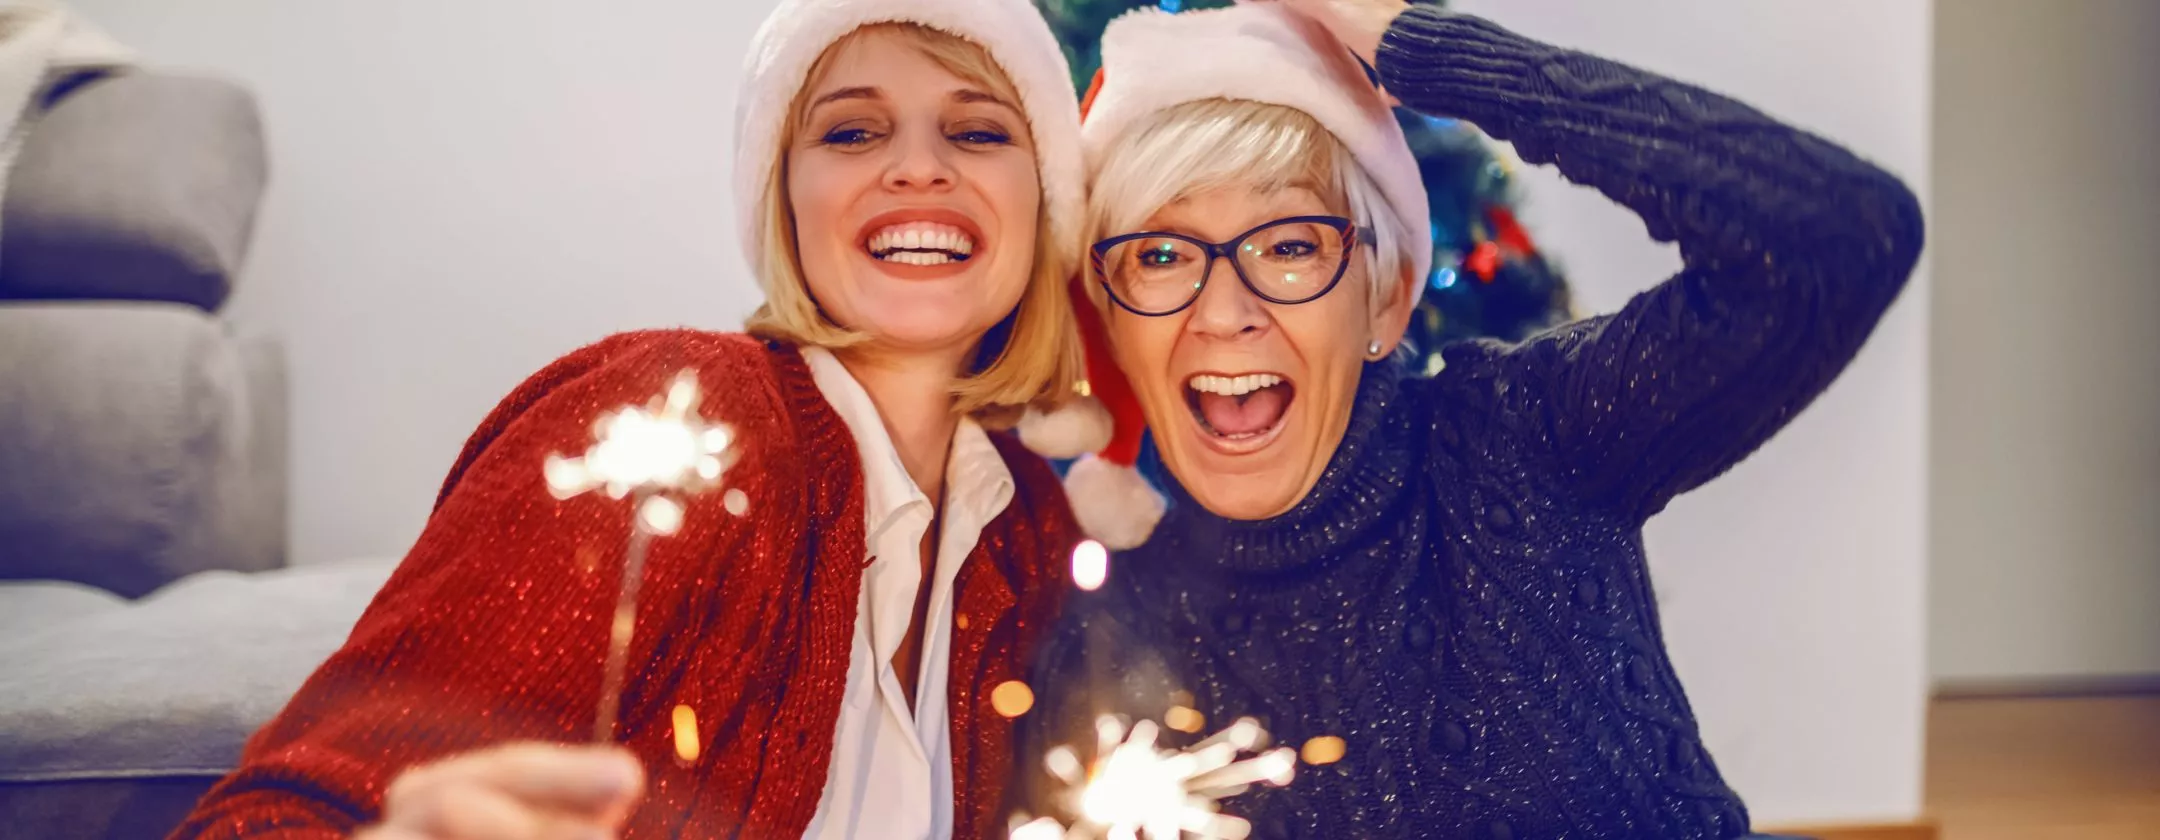 Senior woman taking Christmas photo with daughter